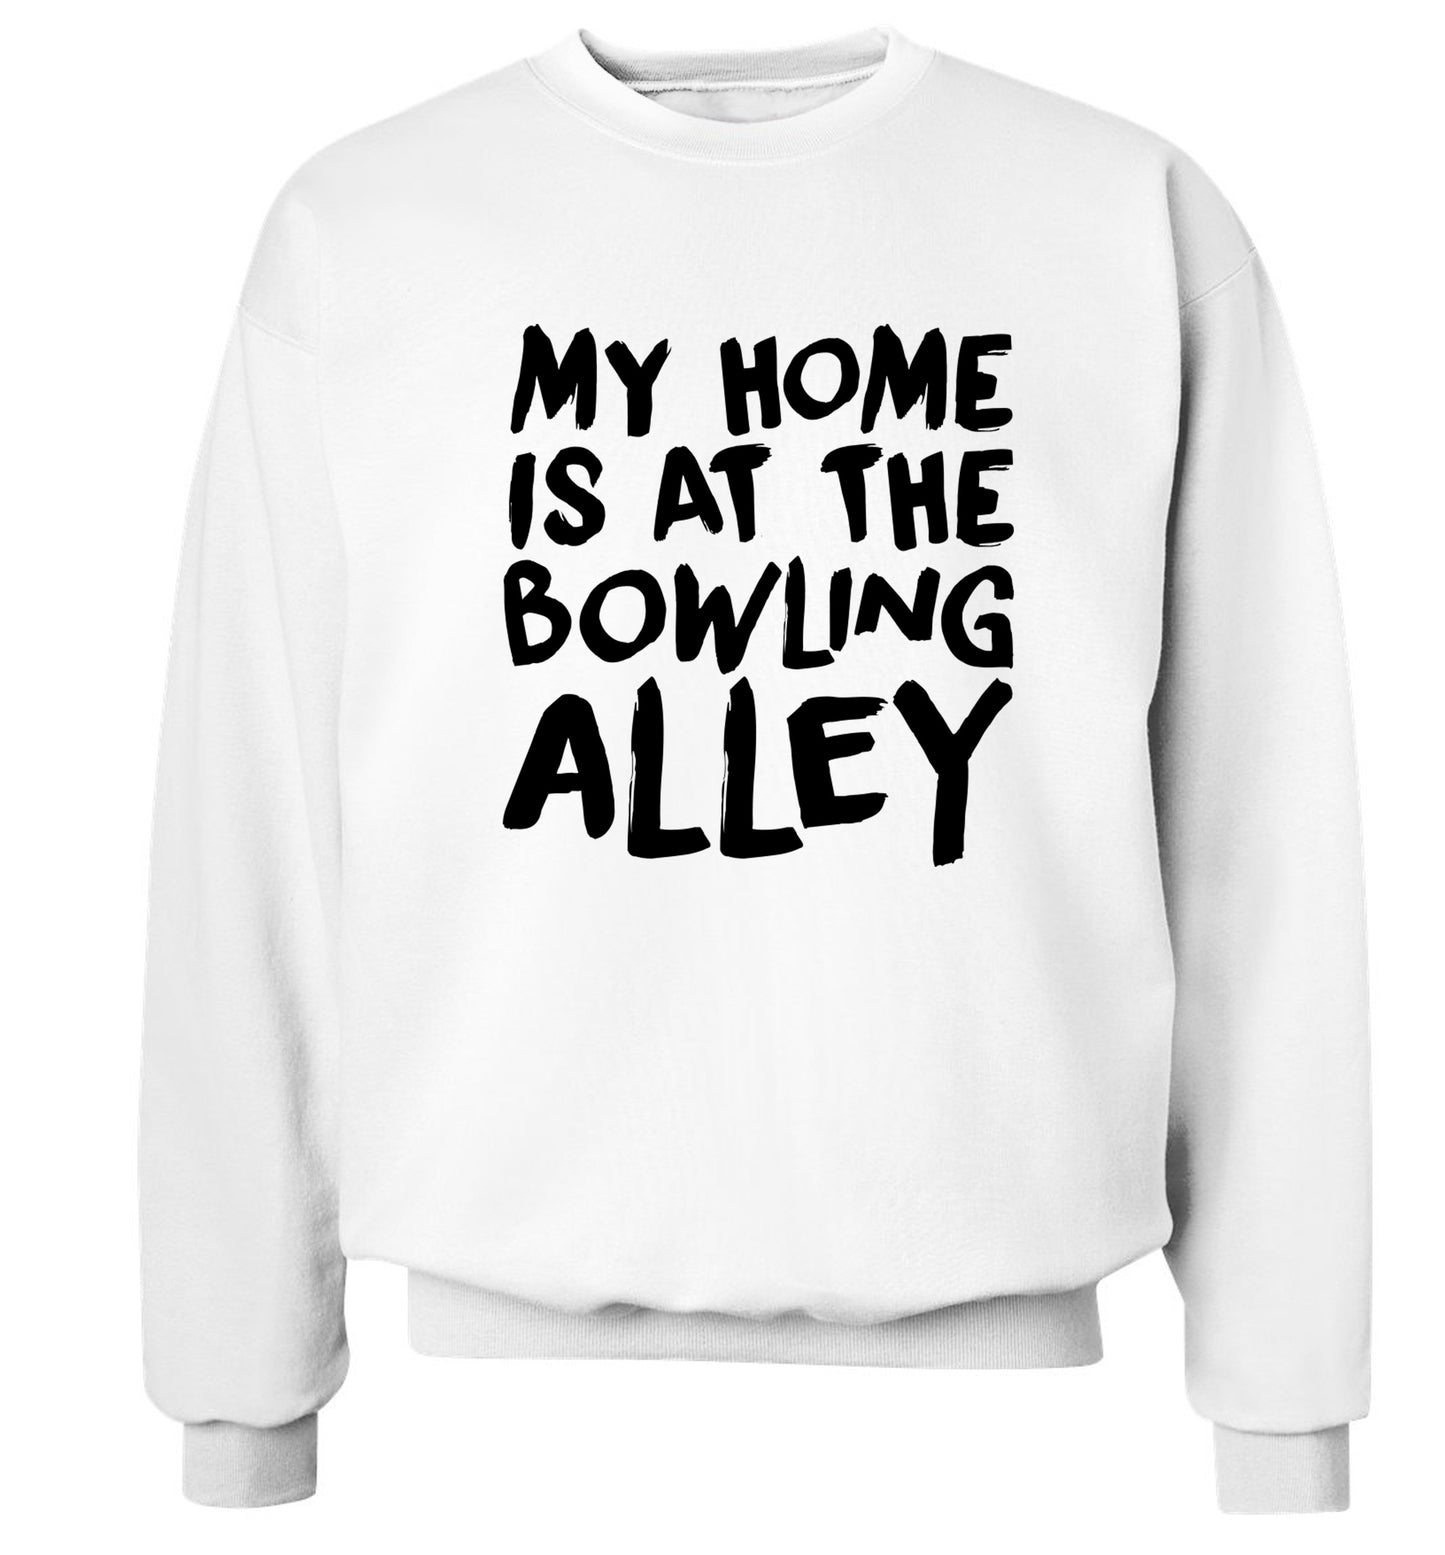 My home is at the bowling alley Adult's unisex white Sweater 2XL